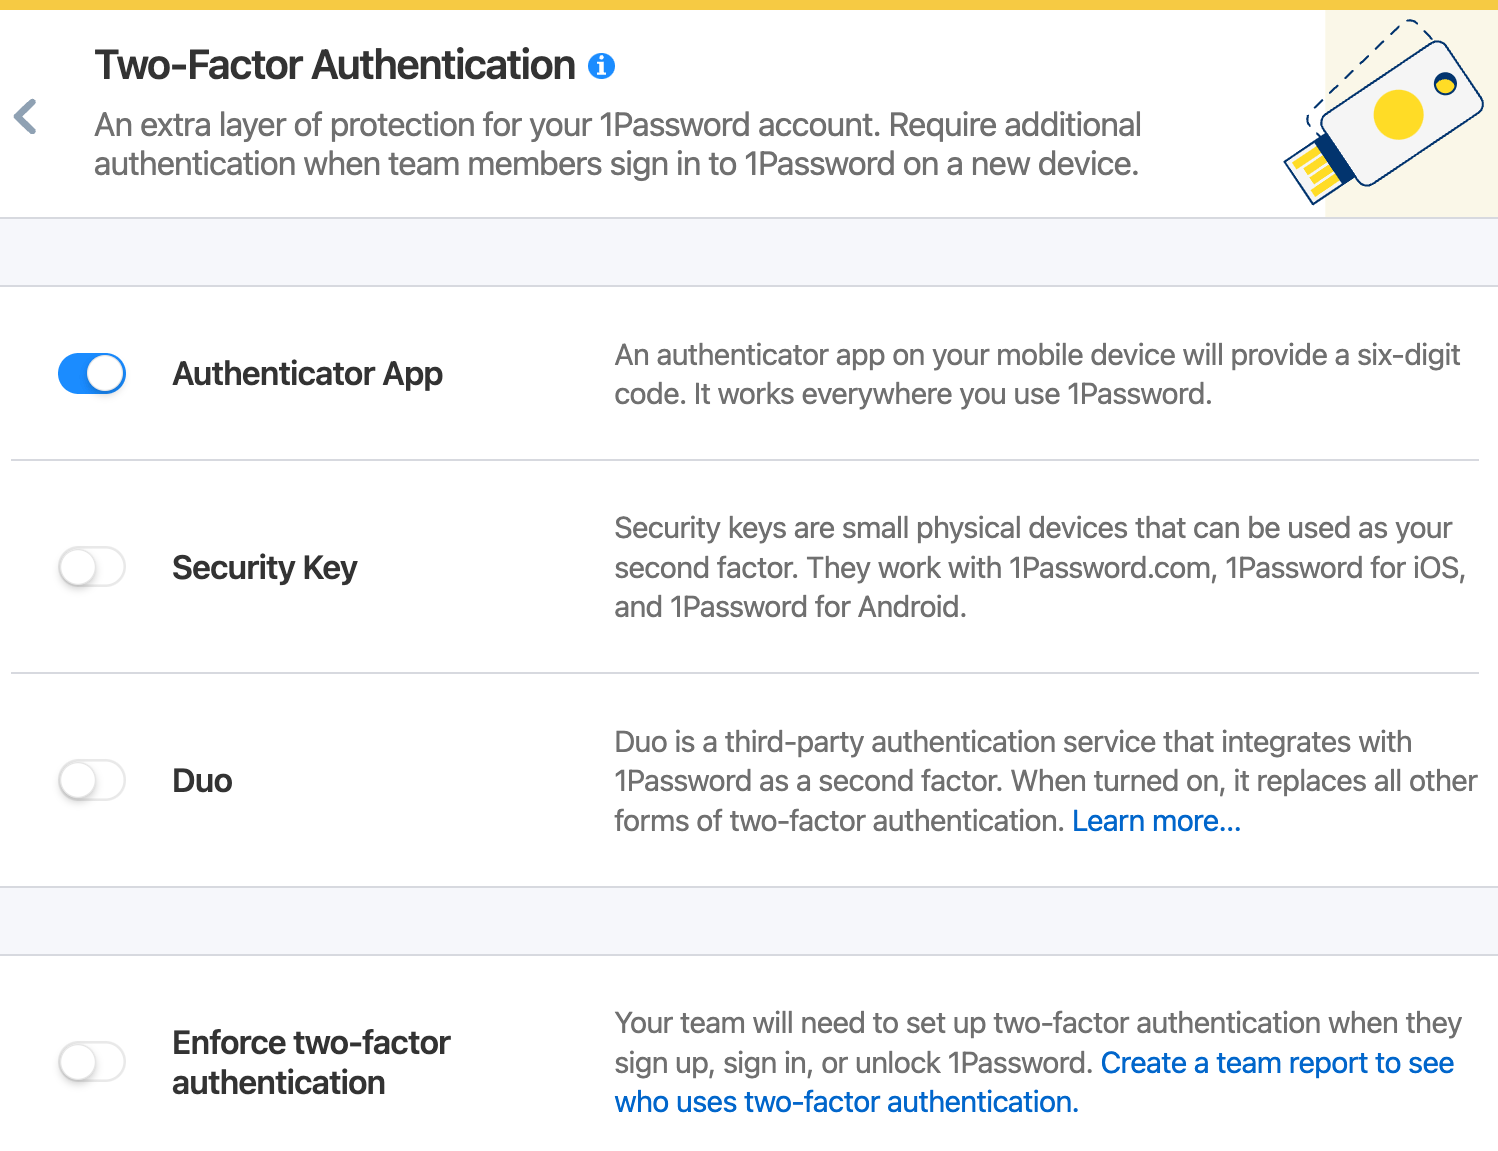 The two-factor authentication settings for business accounts